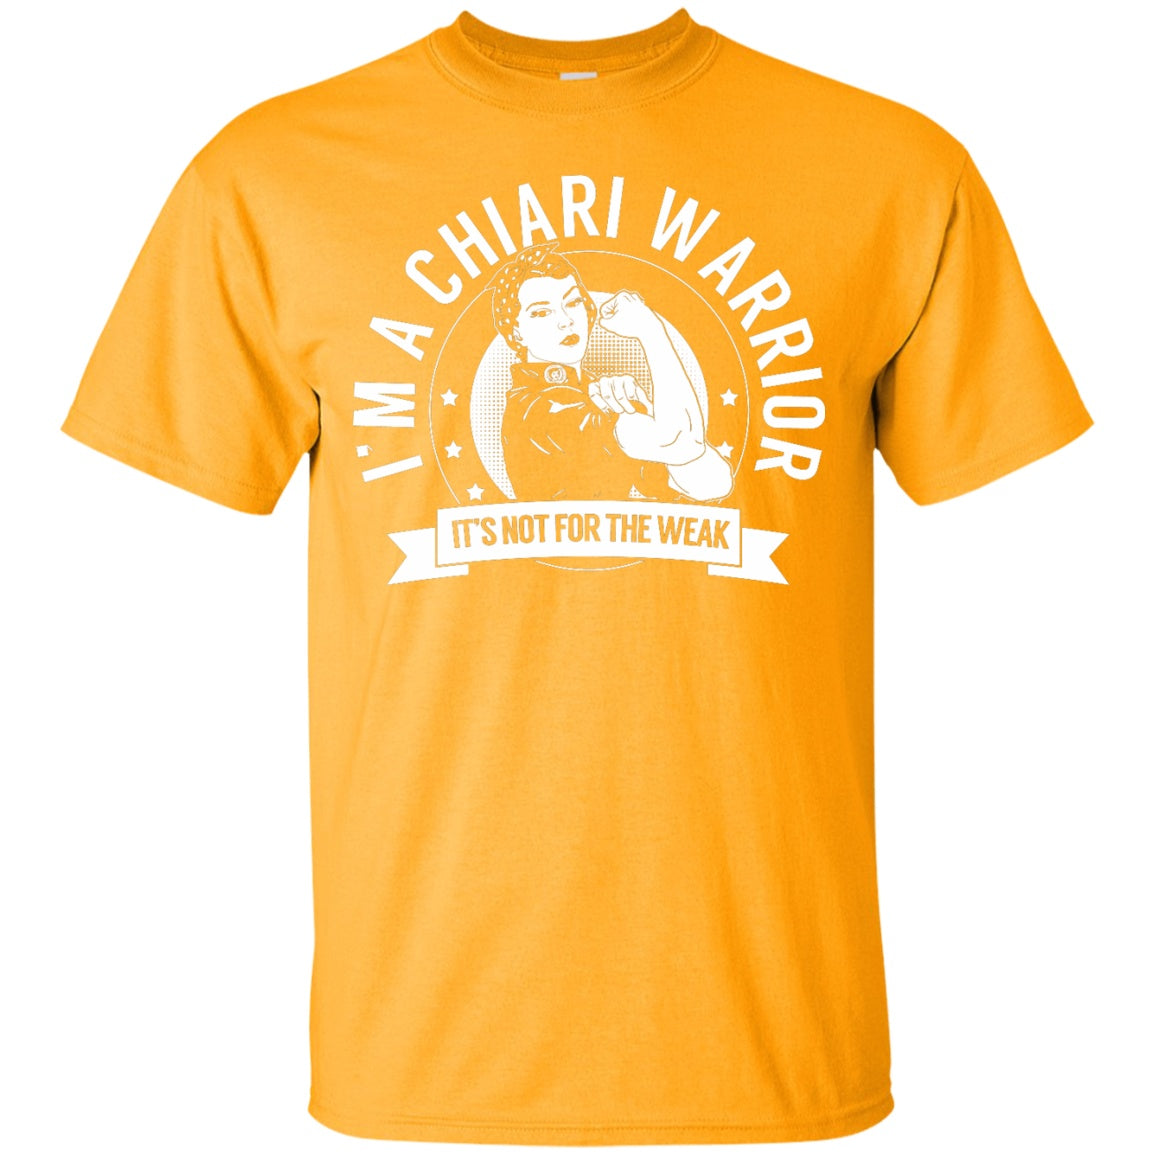 Chiari Warrior Not for the Weak Unisex Shirt - The Unchargeables